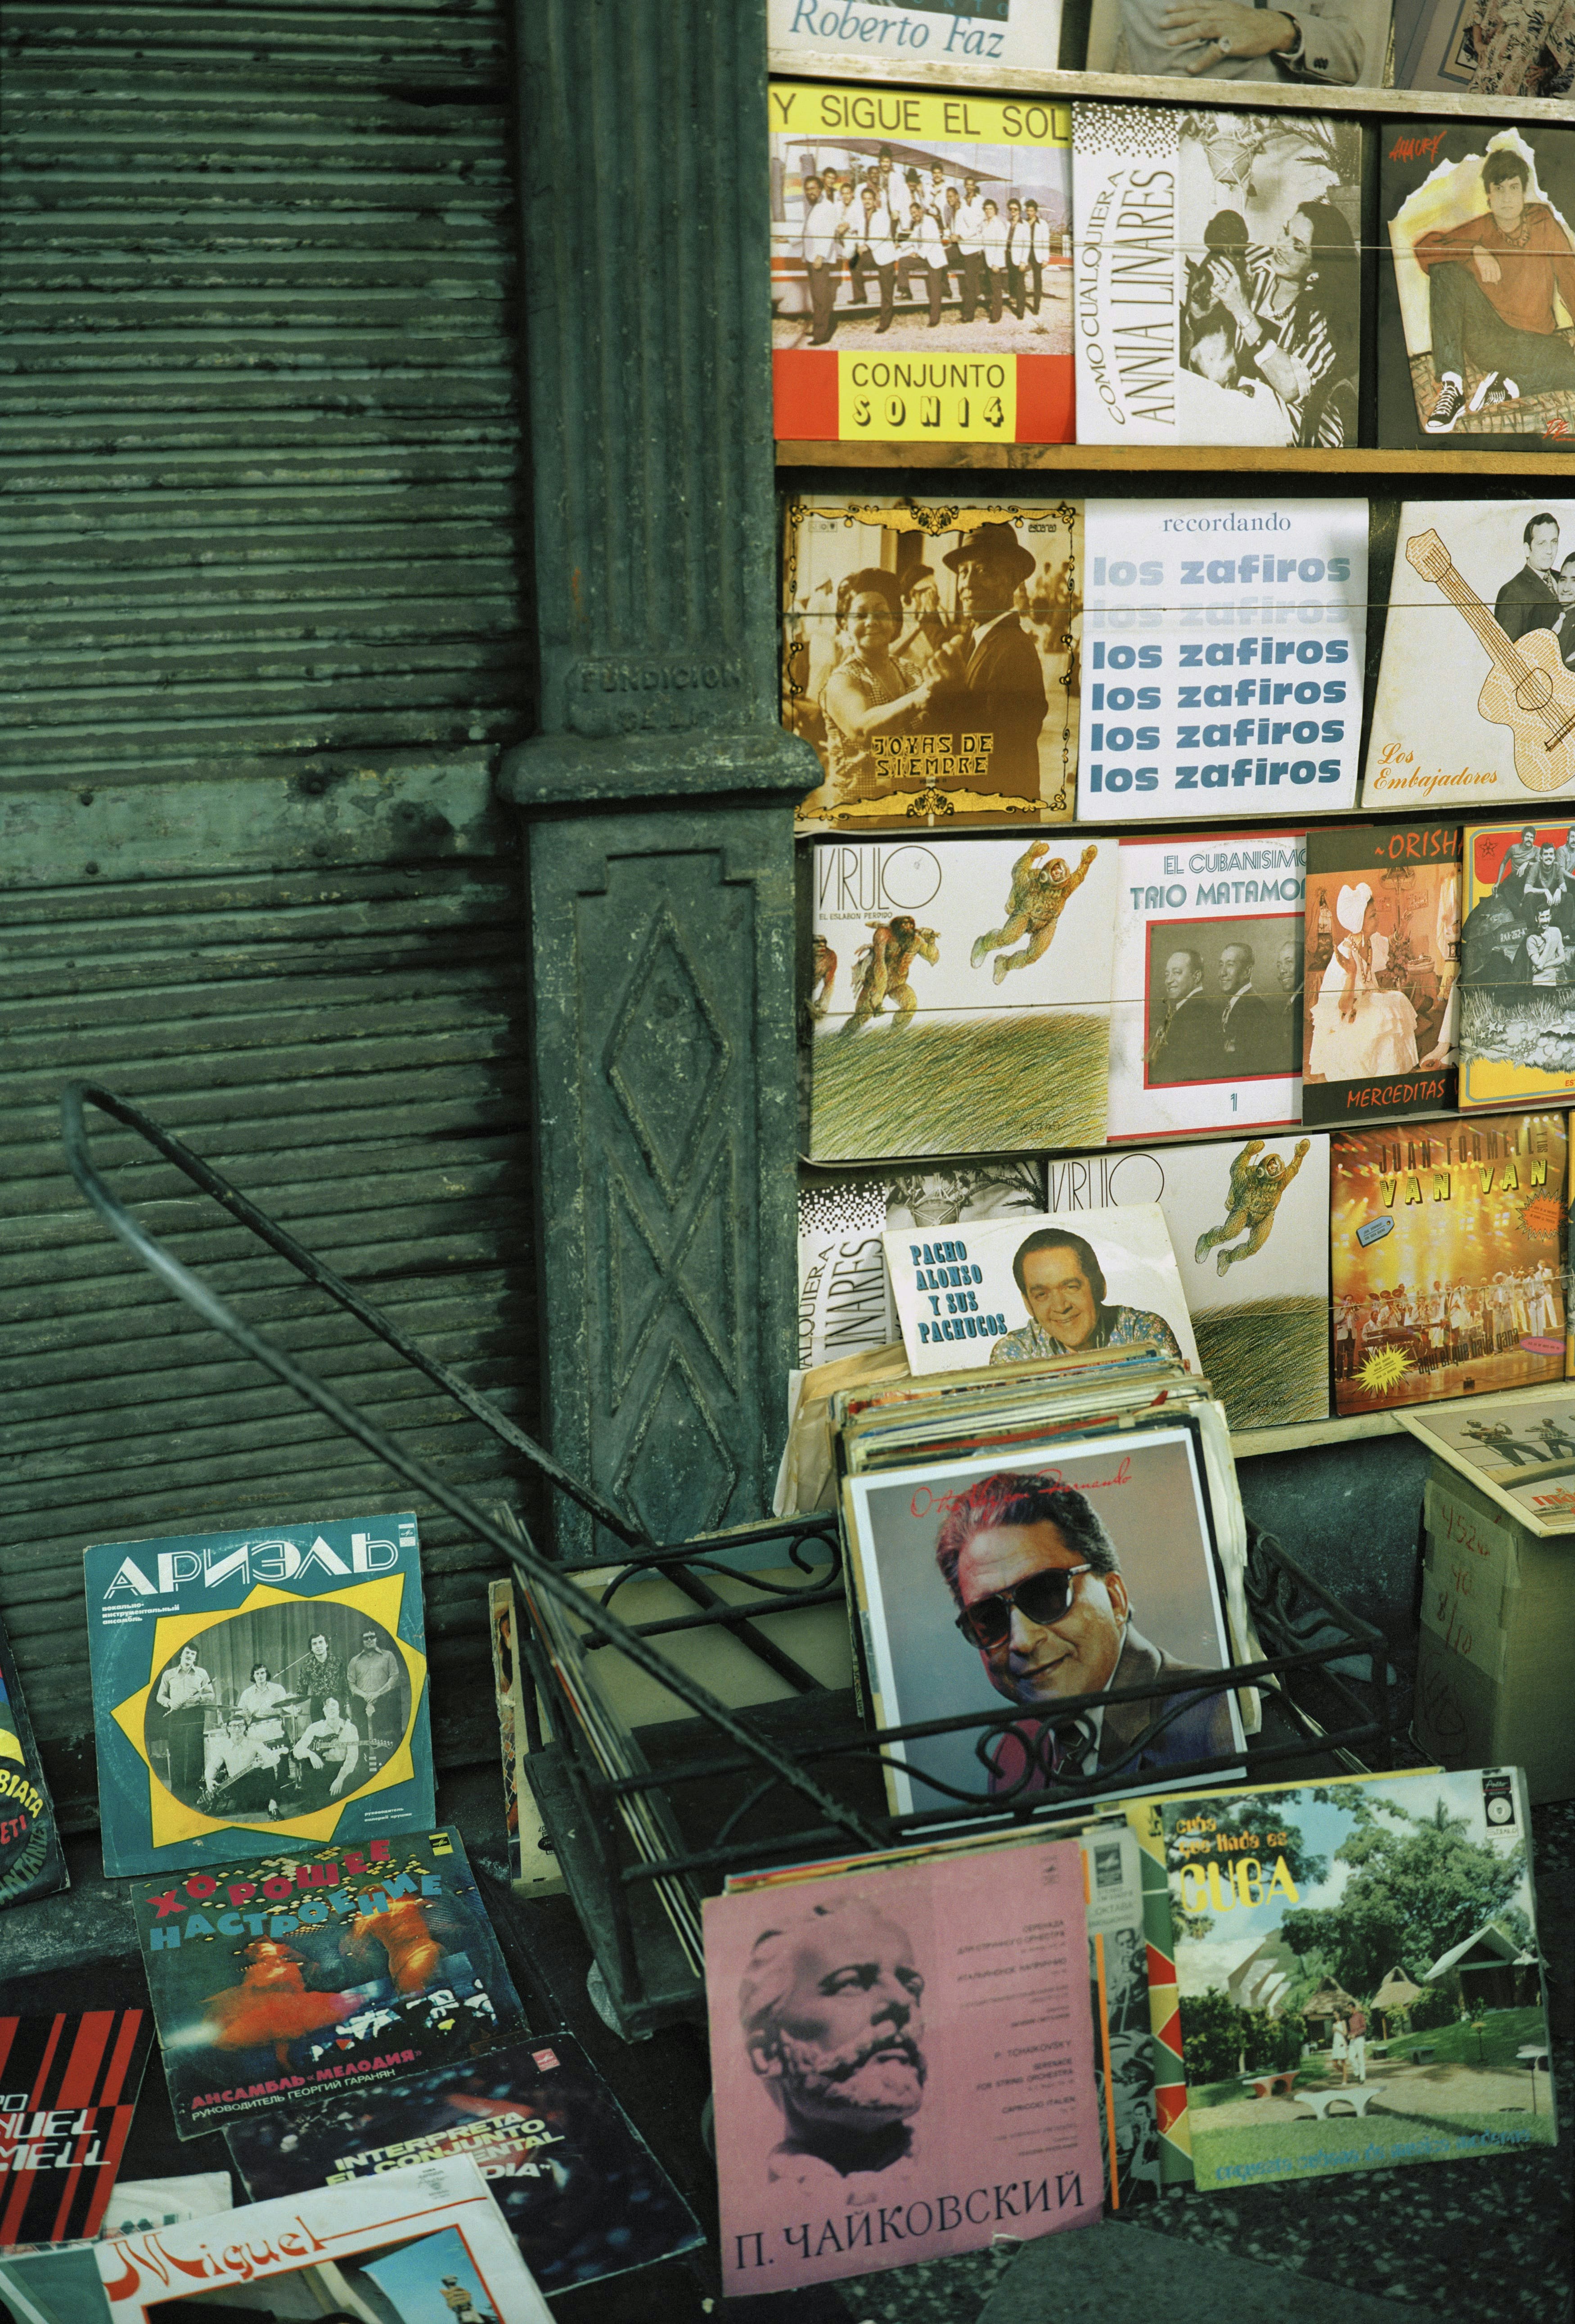 The sale of personal items such as records and books was a common sight on the streets of Havana during the 1990s “ Special Period.”. A wide variety of musical genres — Russian, Pop (Los Van Van) Son, Cuban country music from the 40s and on (Los Trio Matamores) and African religion Yoruba-inspired (Orisha) are on display here.